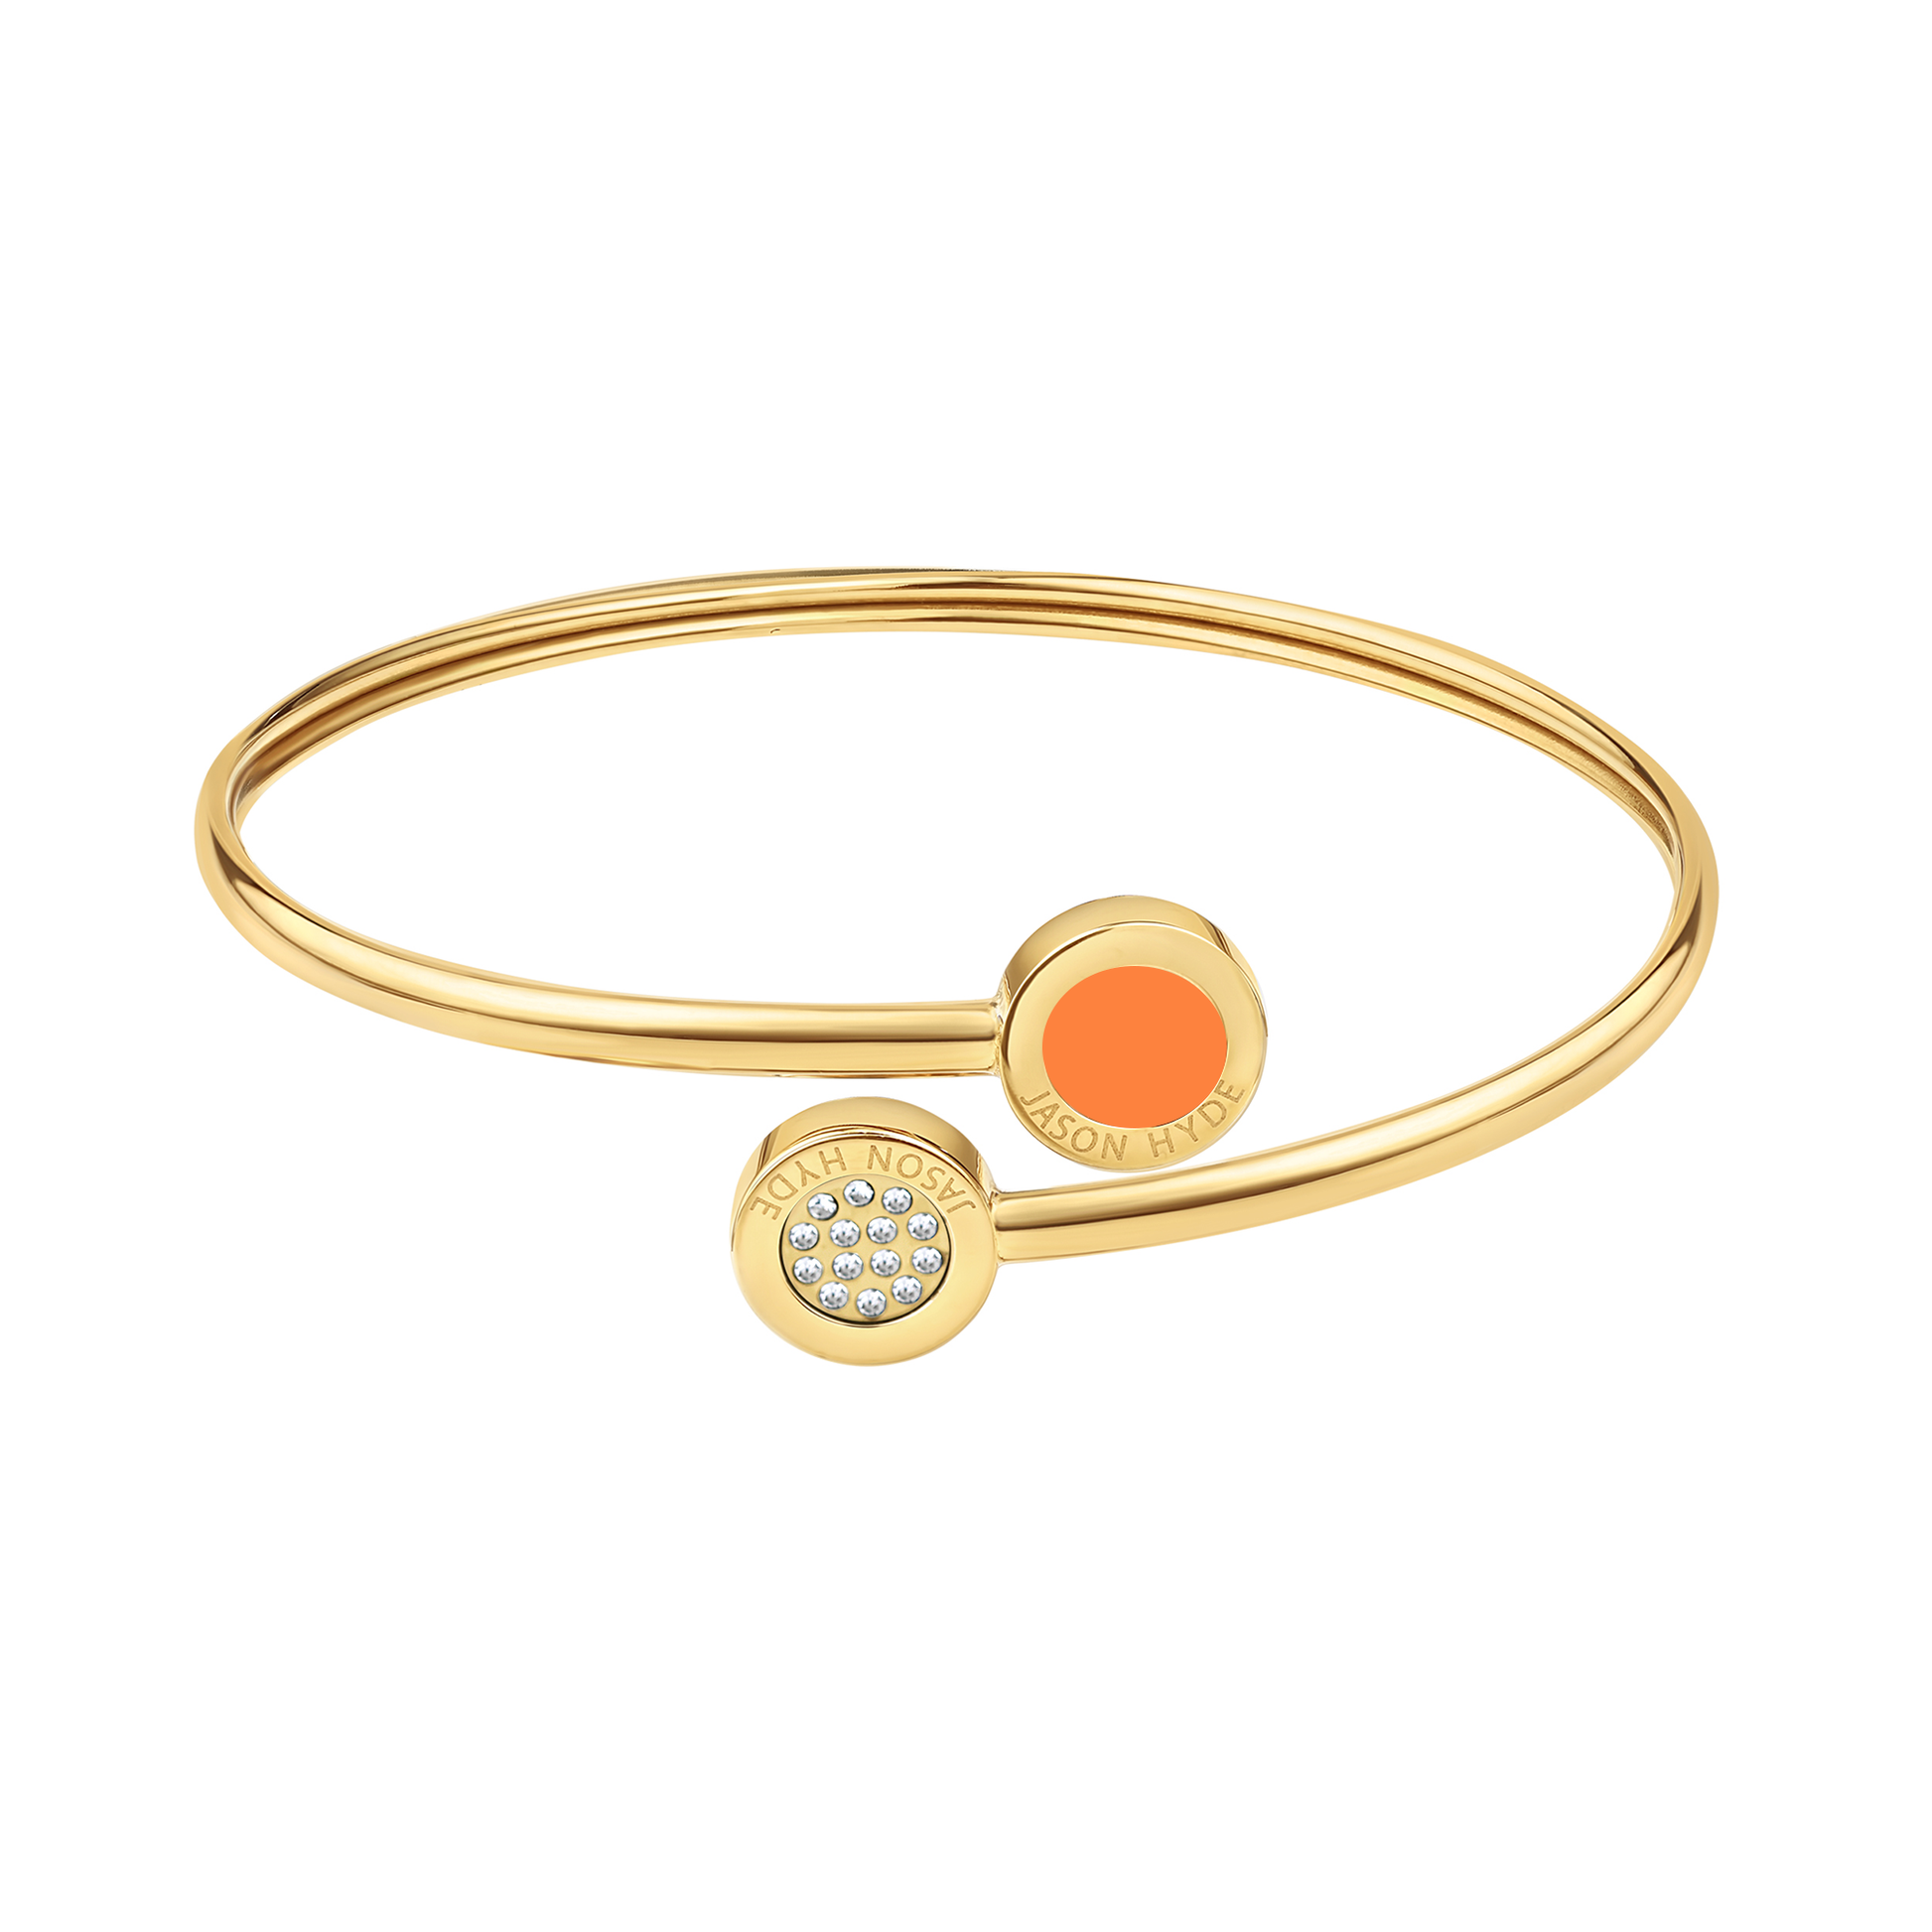 OCEAN ORANGE AND PAVE CHIPS BANGLE